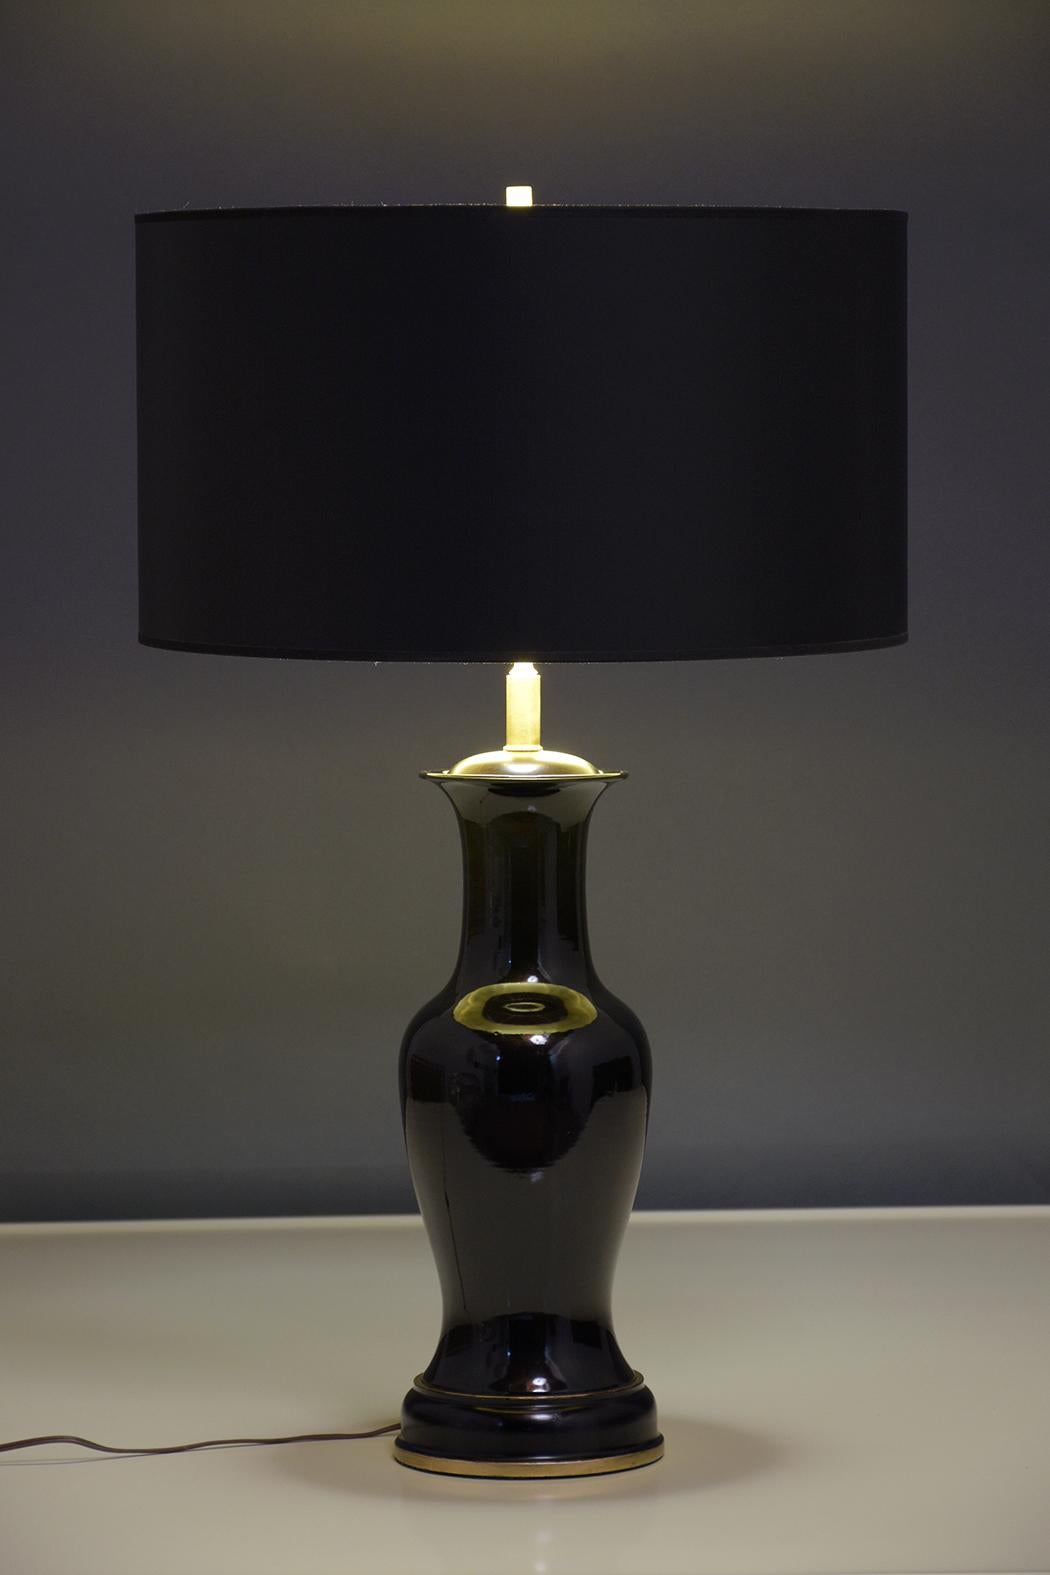 An elegant pair of black porcelain table lamps that have been newly restored by our craftsmen and in working condition. This set of lamps features new matte black color shades and beautiful black porcelain bases that rest on carved wood bases with